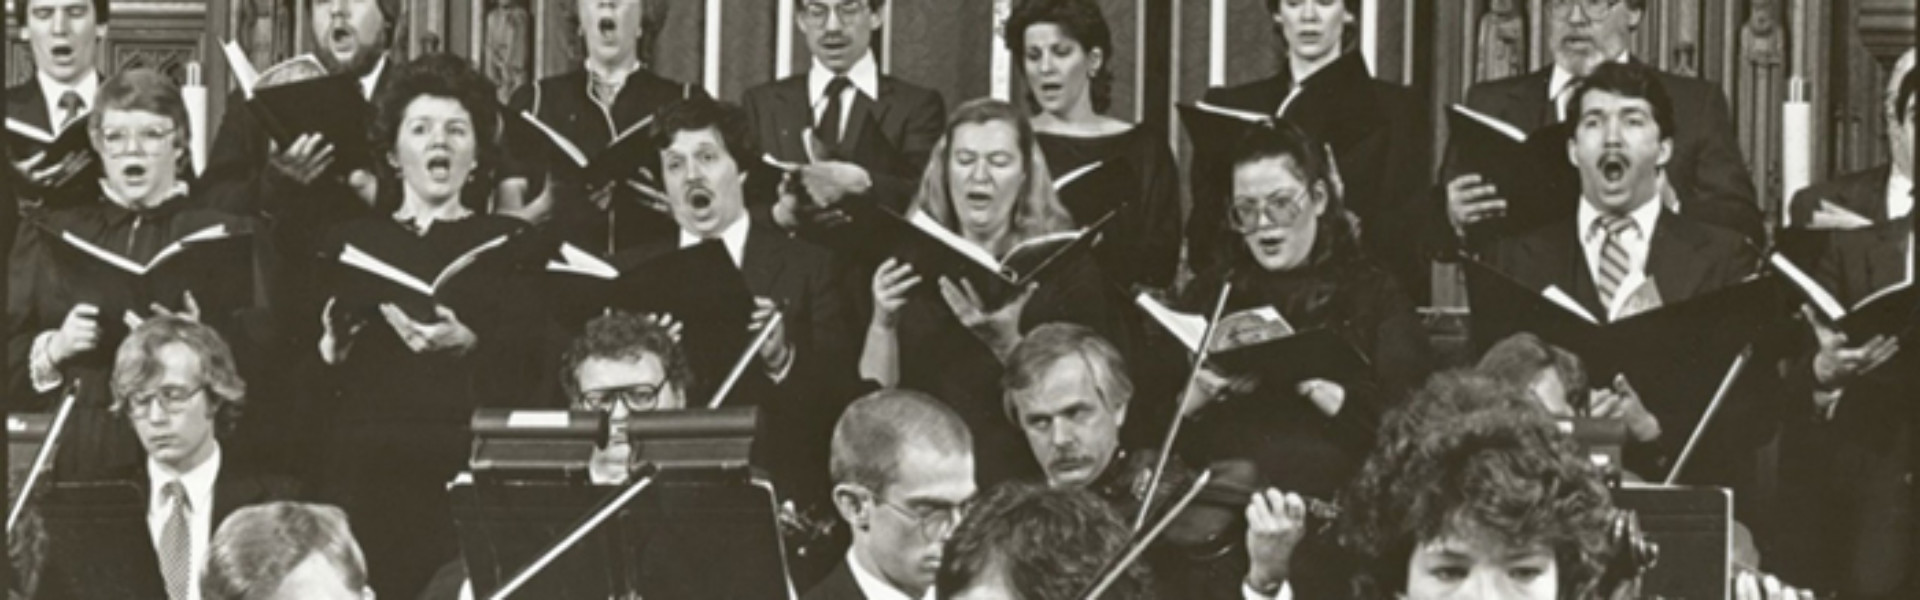 Chicago's Music of the Baroque 1987